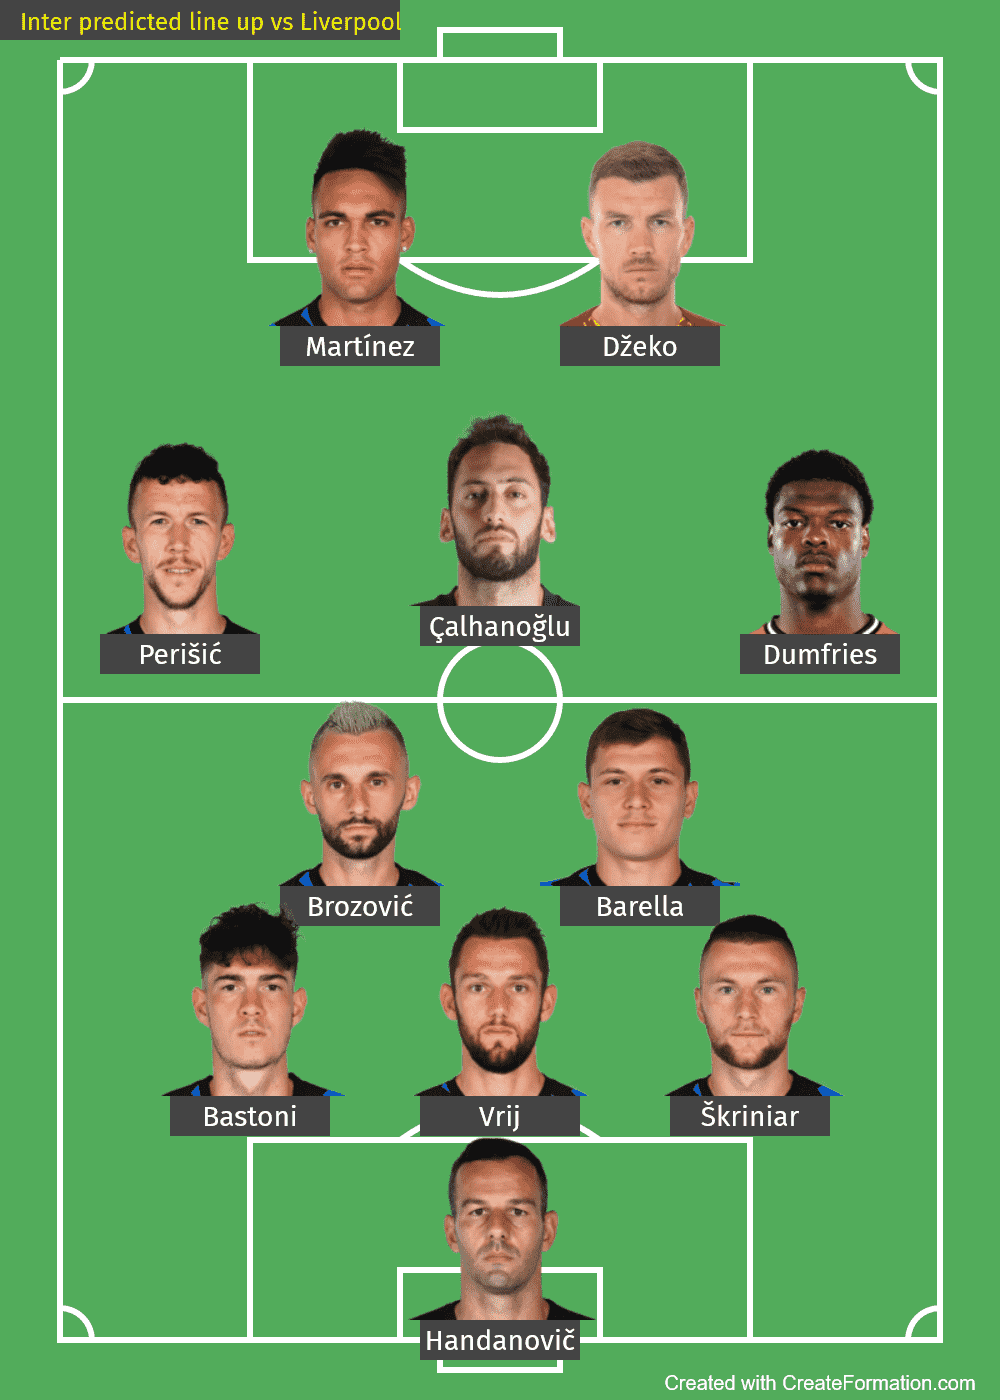 Inter predicted line up vs Liverpool-2022-UCL(1)